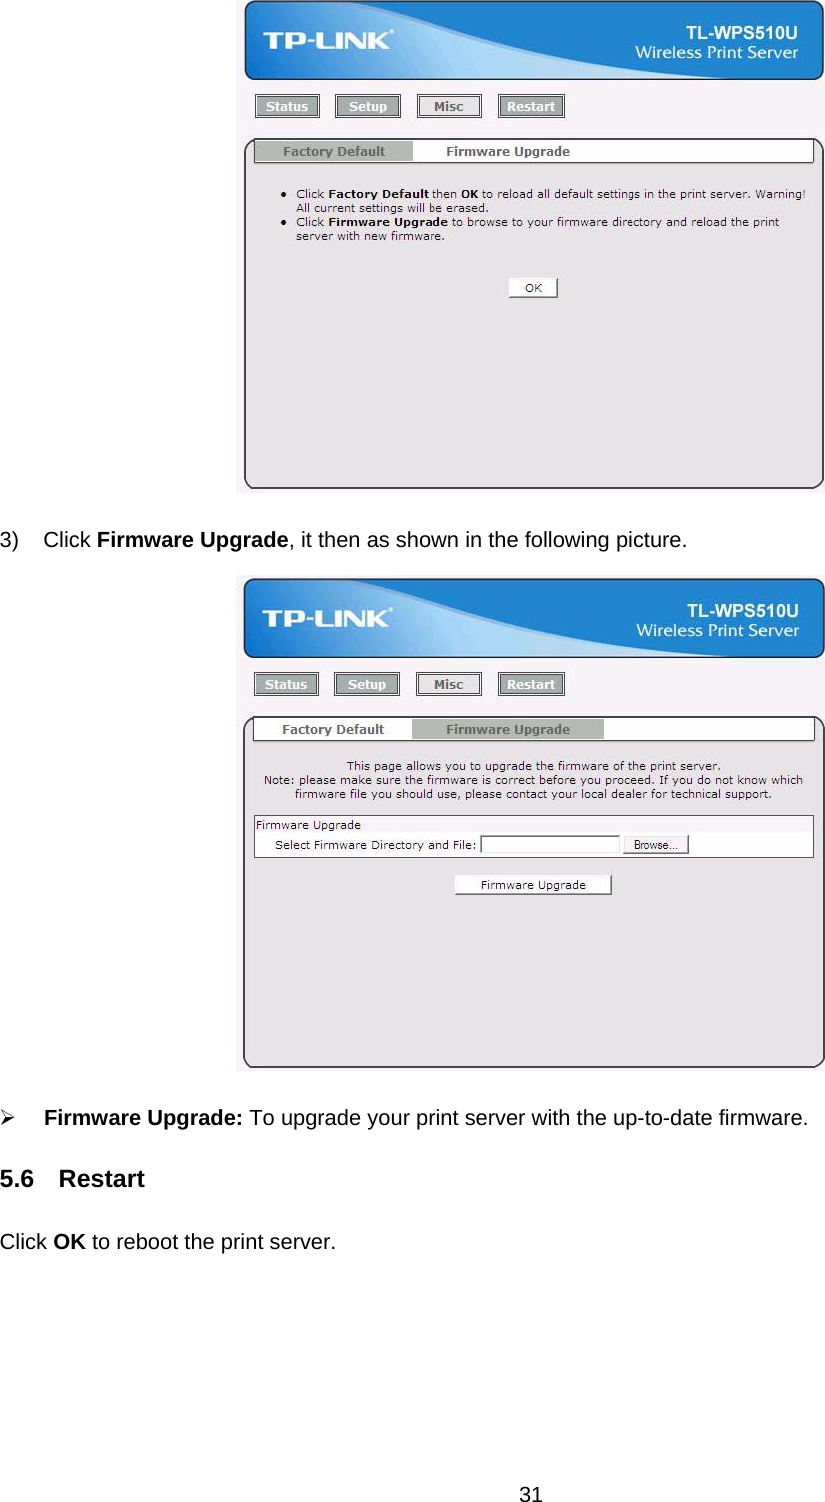  31   3) Click Firmware Upgrade, it then as shown in the following picture.  ¾ Firmware Upgrade: To upgrade your print server with the up-to-date firmware. 5.6  Restart Click OK to reboot the print server. 